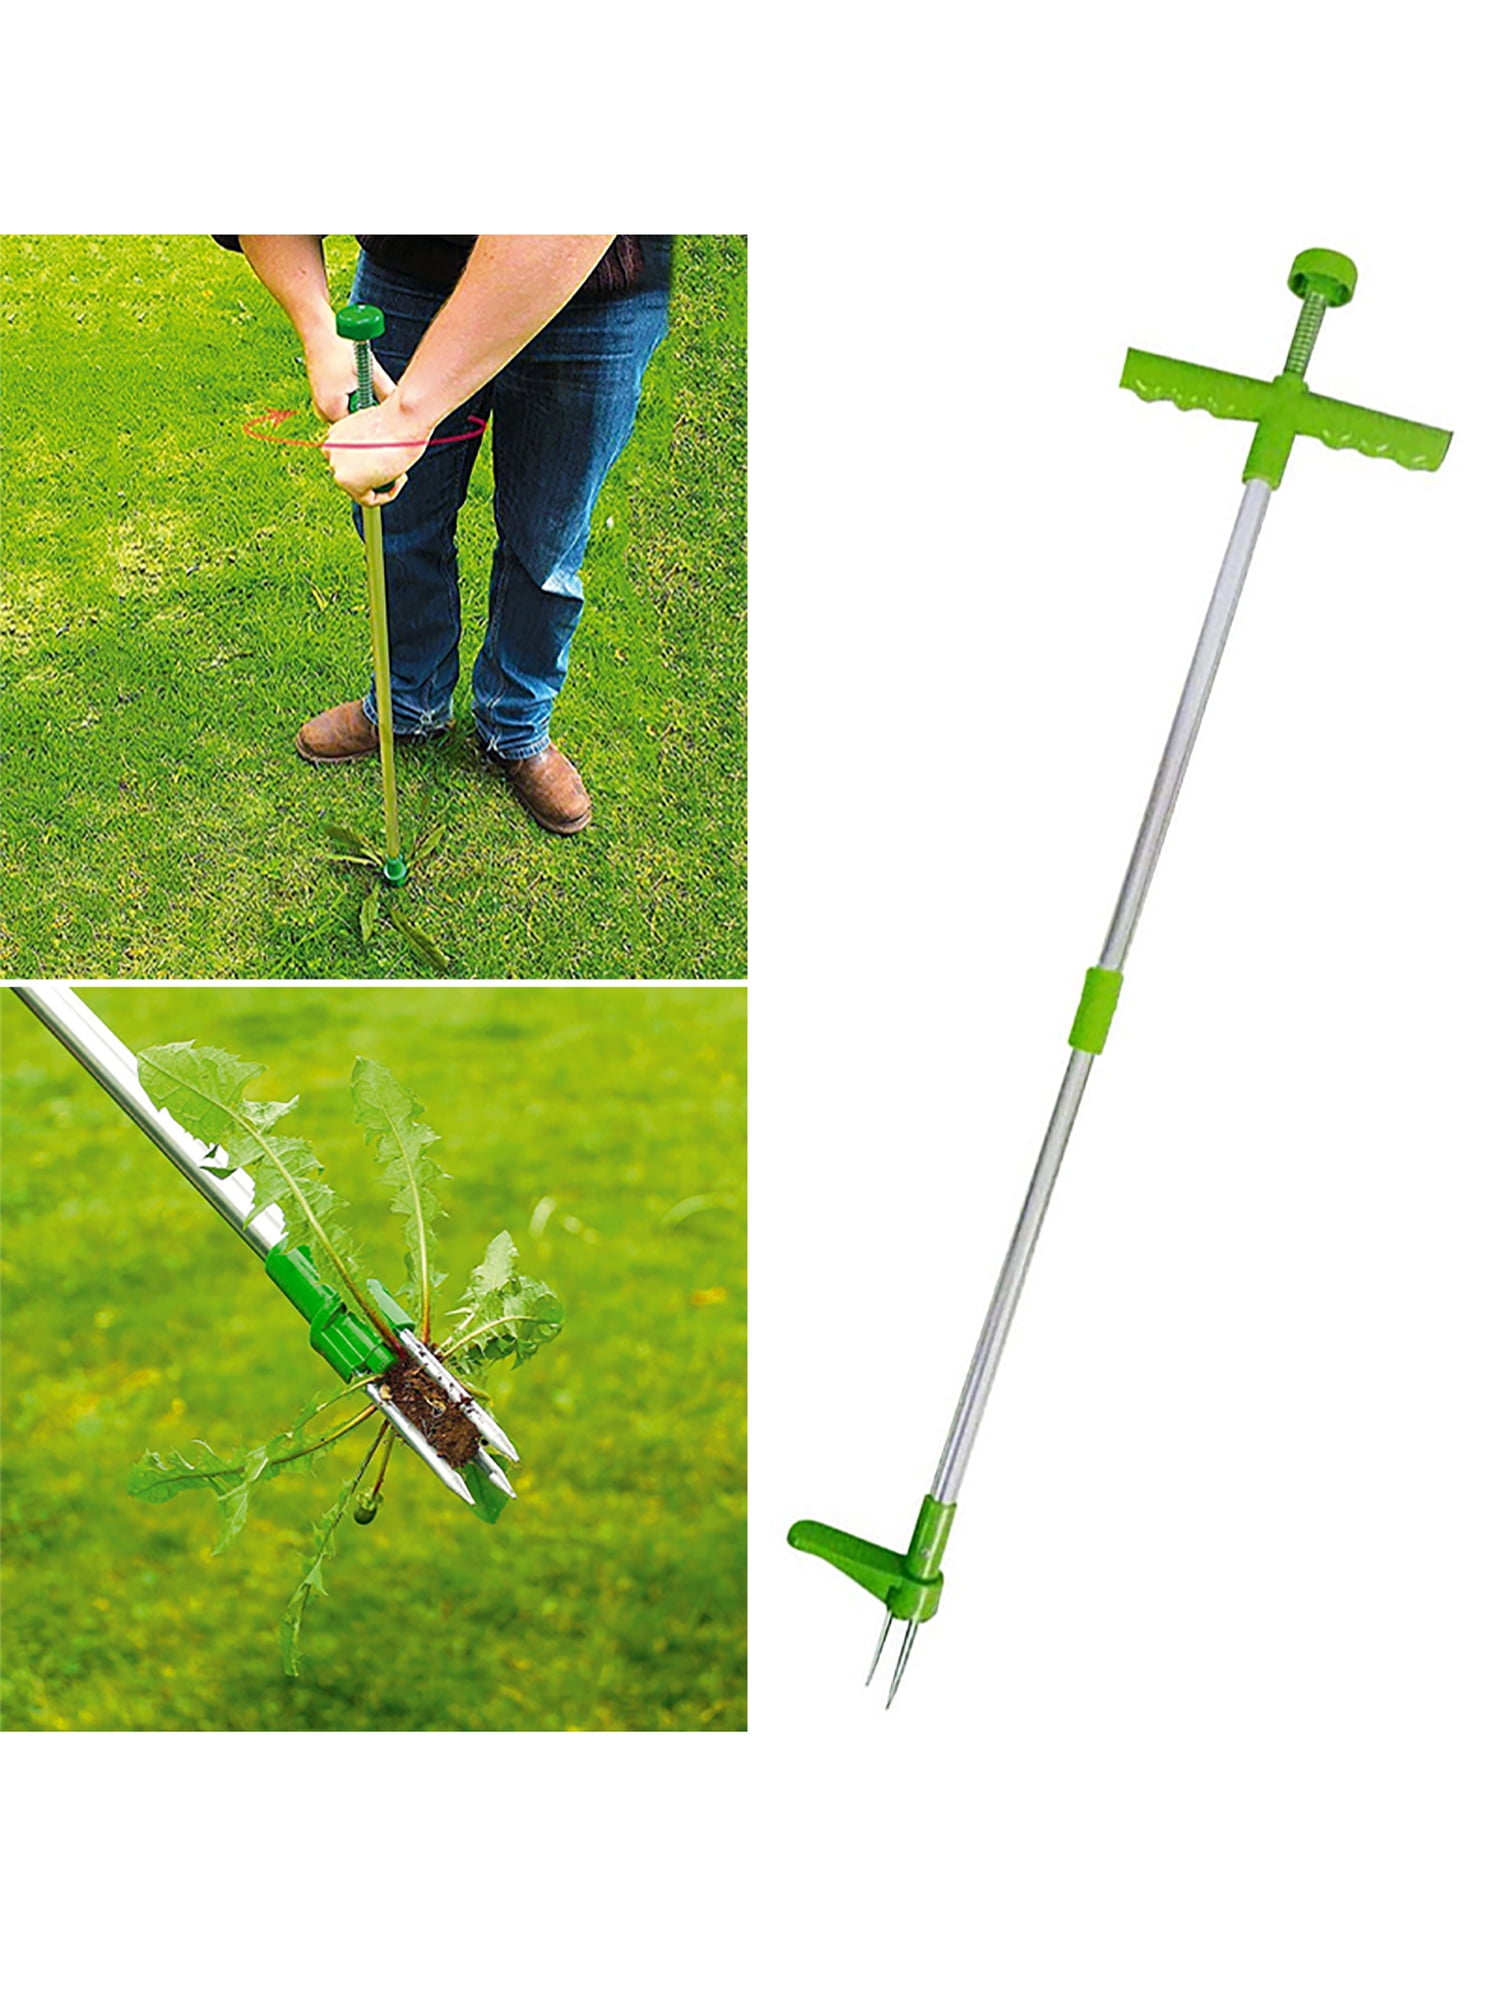 Details about   Weed Puller Weeder Twister Twist Pull Garden Lawn Root Killer Remover Hand Tool 